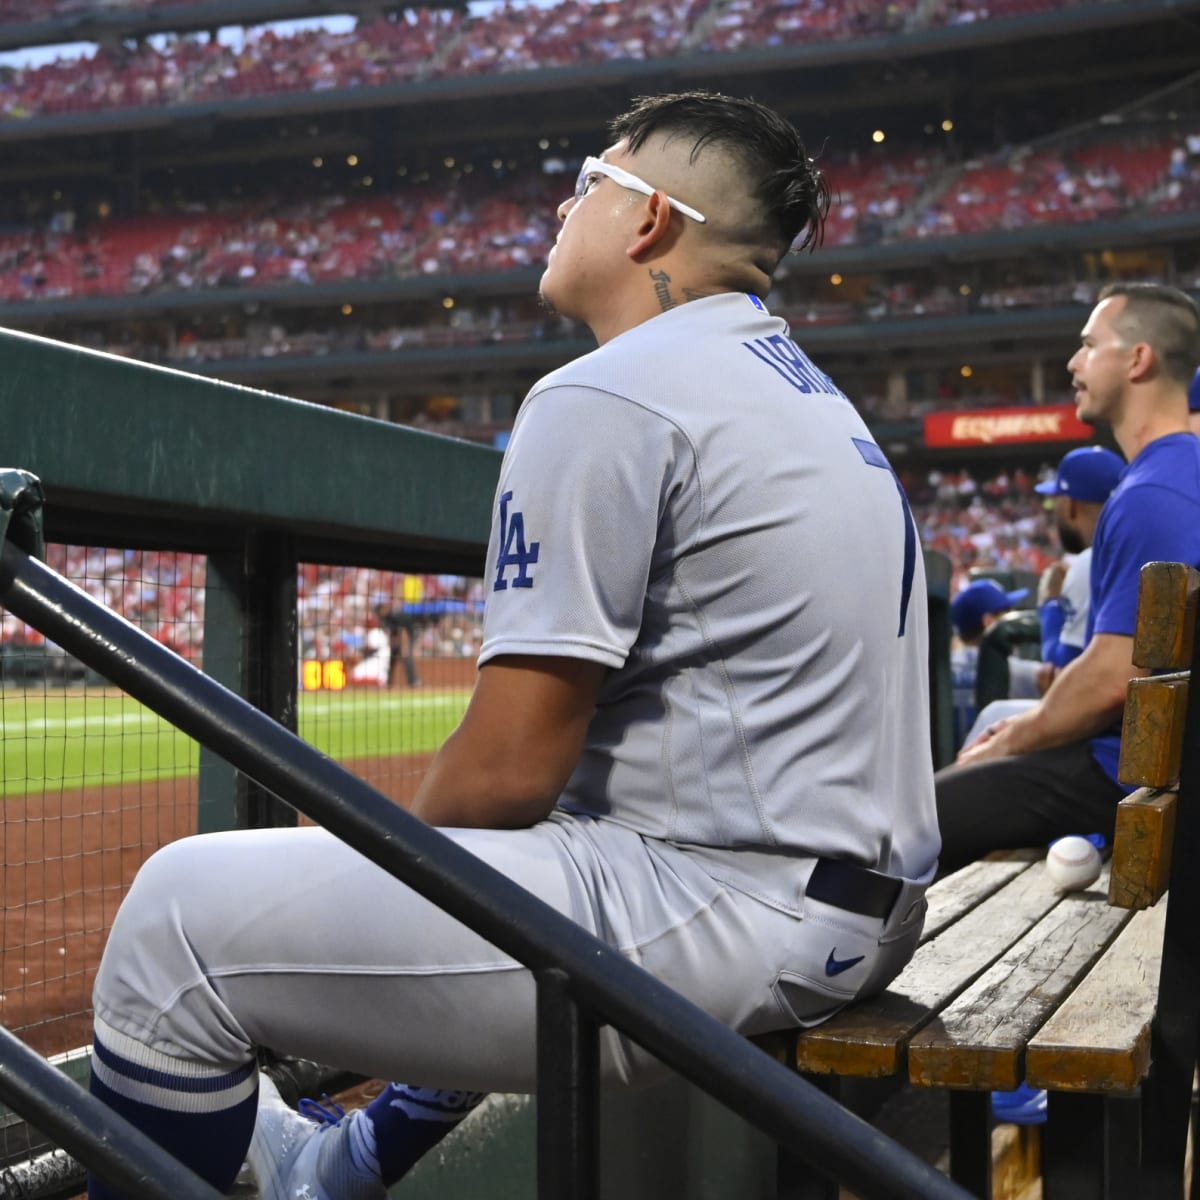 LMB shouldn't give Urias second chance if MLB career is over